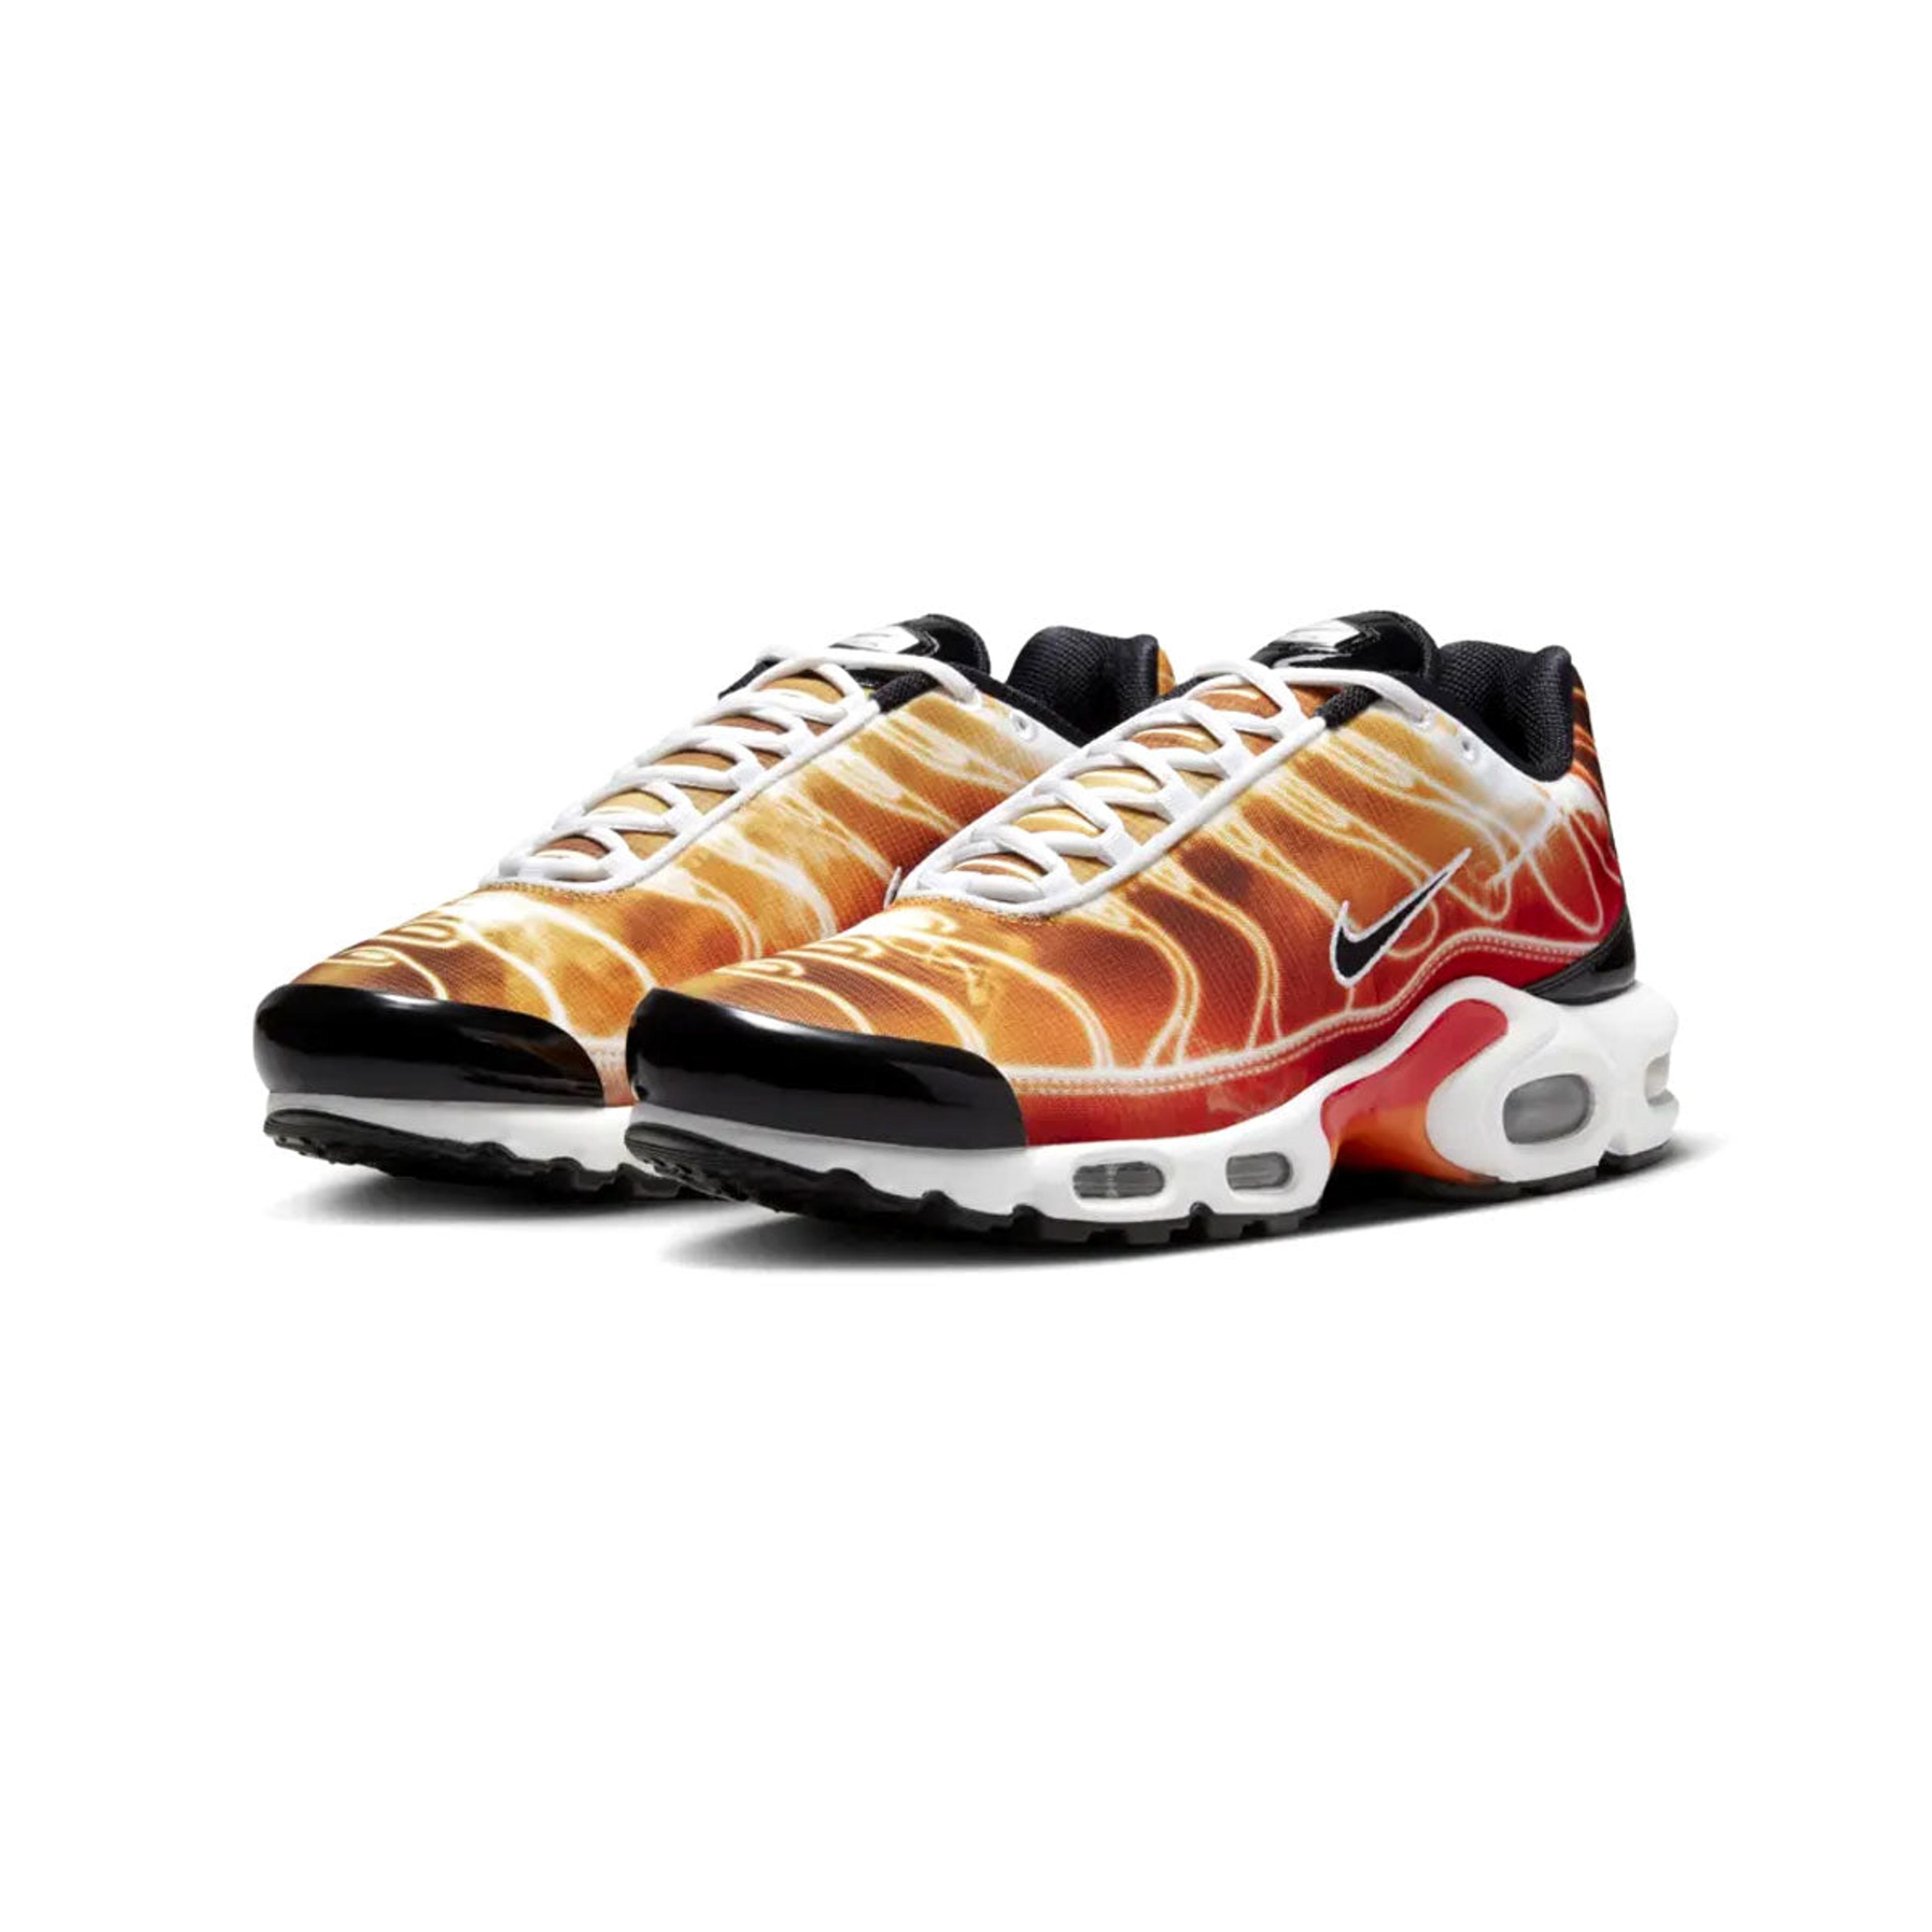 Alternate View 3 of Nike Men's Air Max Plus Light Photography